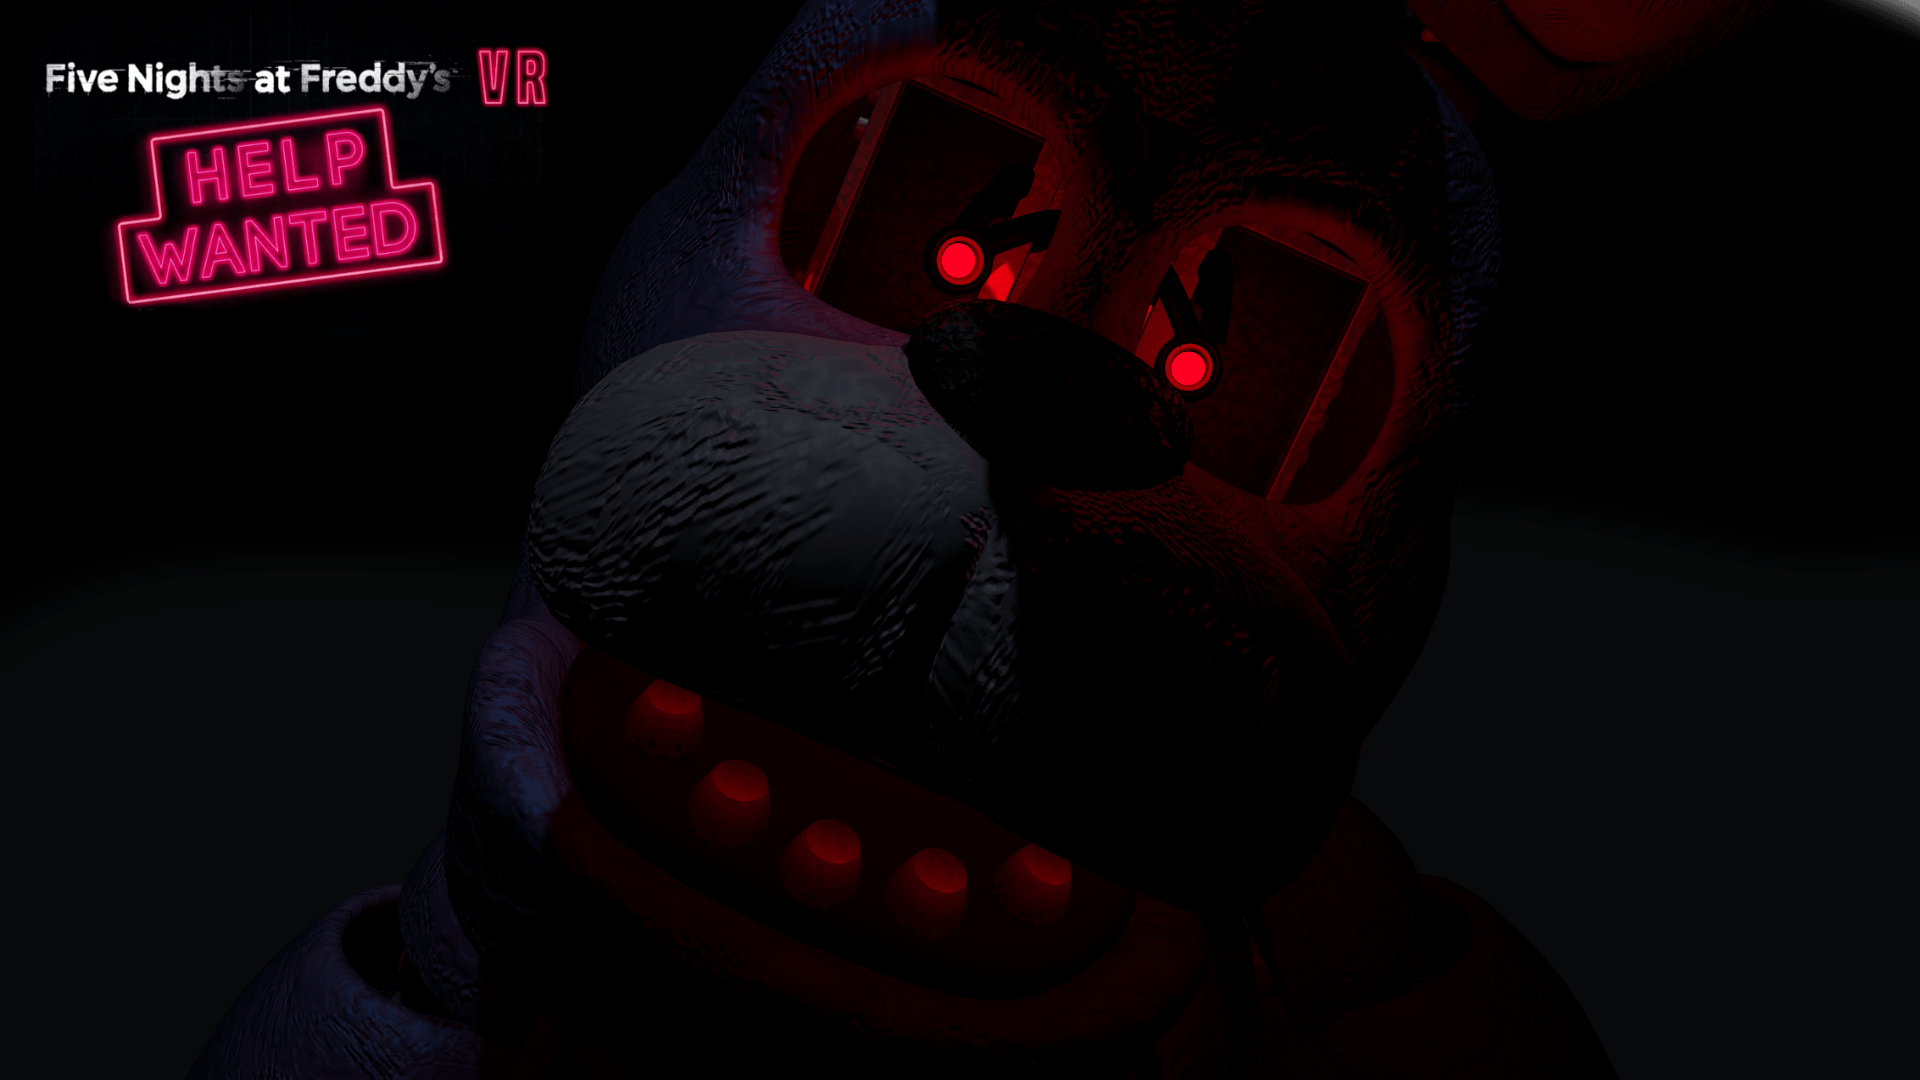 Repair Bonnie. Five Nights at Freddy's VR: Help Wanted. FANMADE